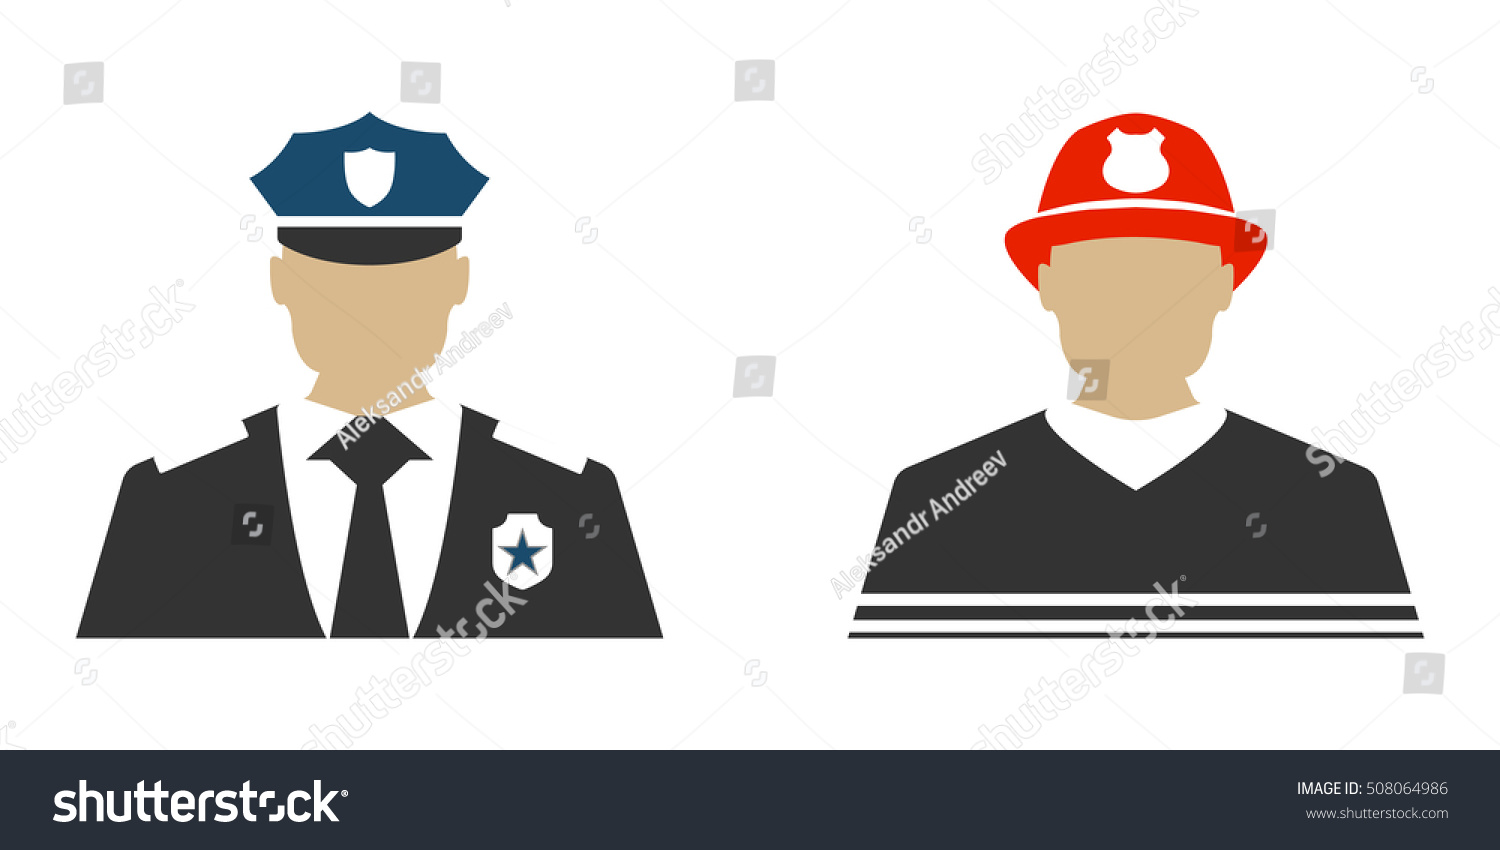 Police Officer Svg Png Icon Free Download (#506407 